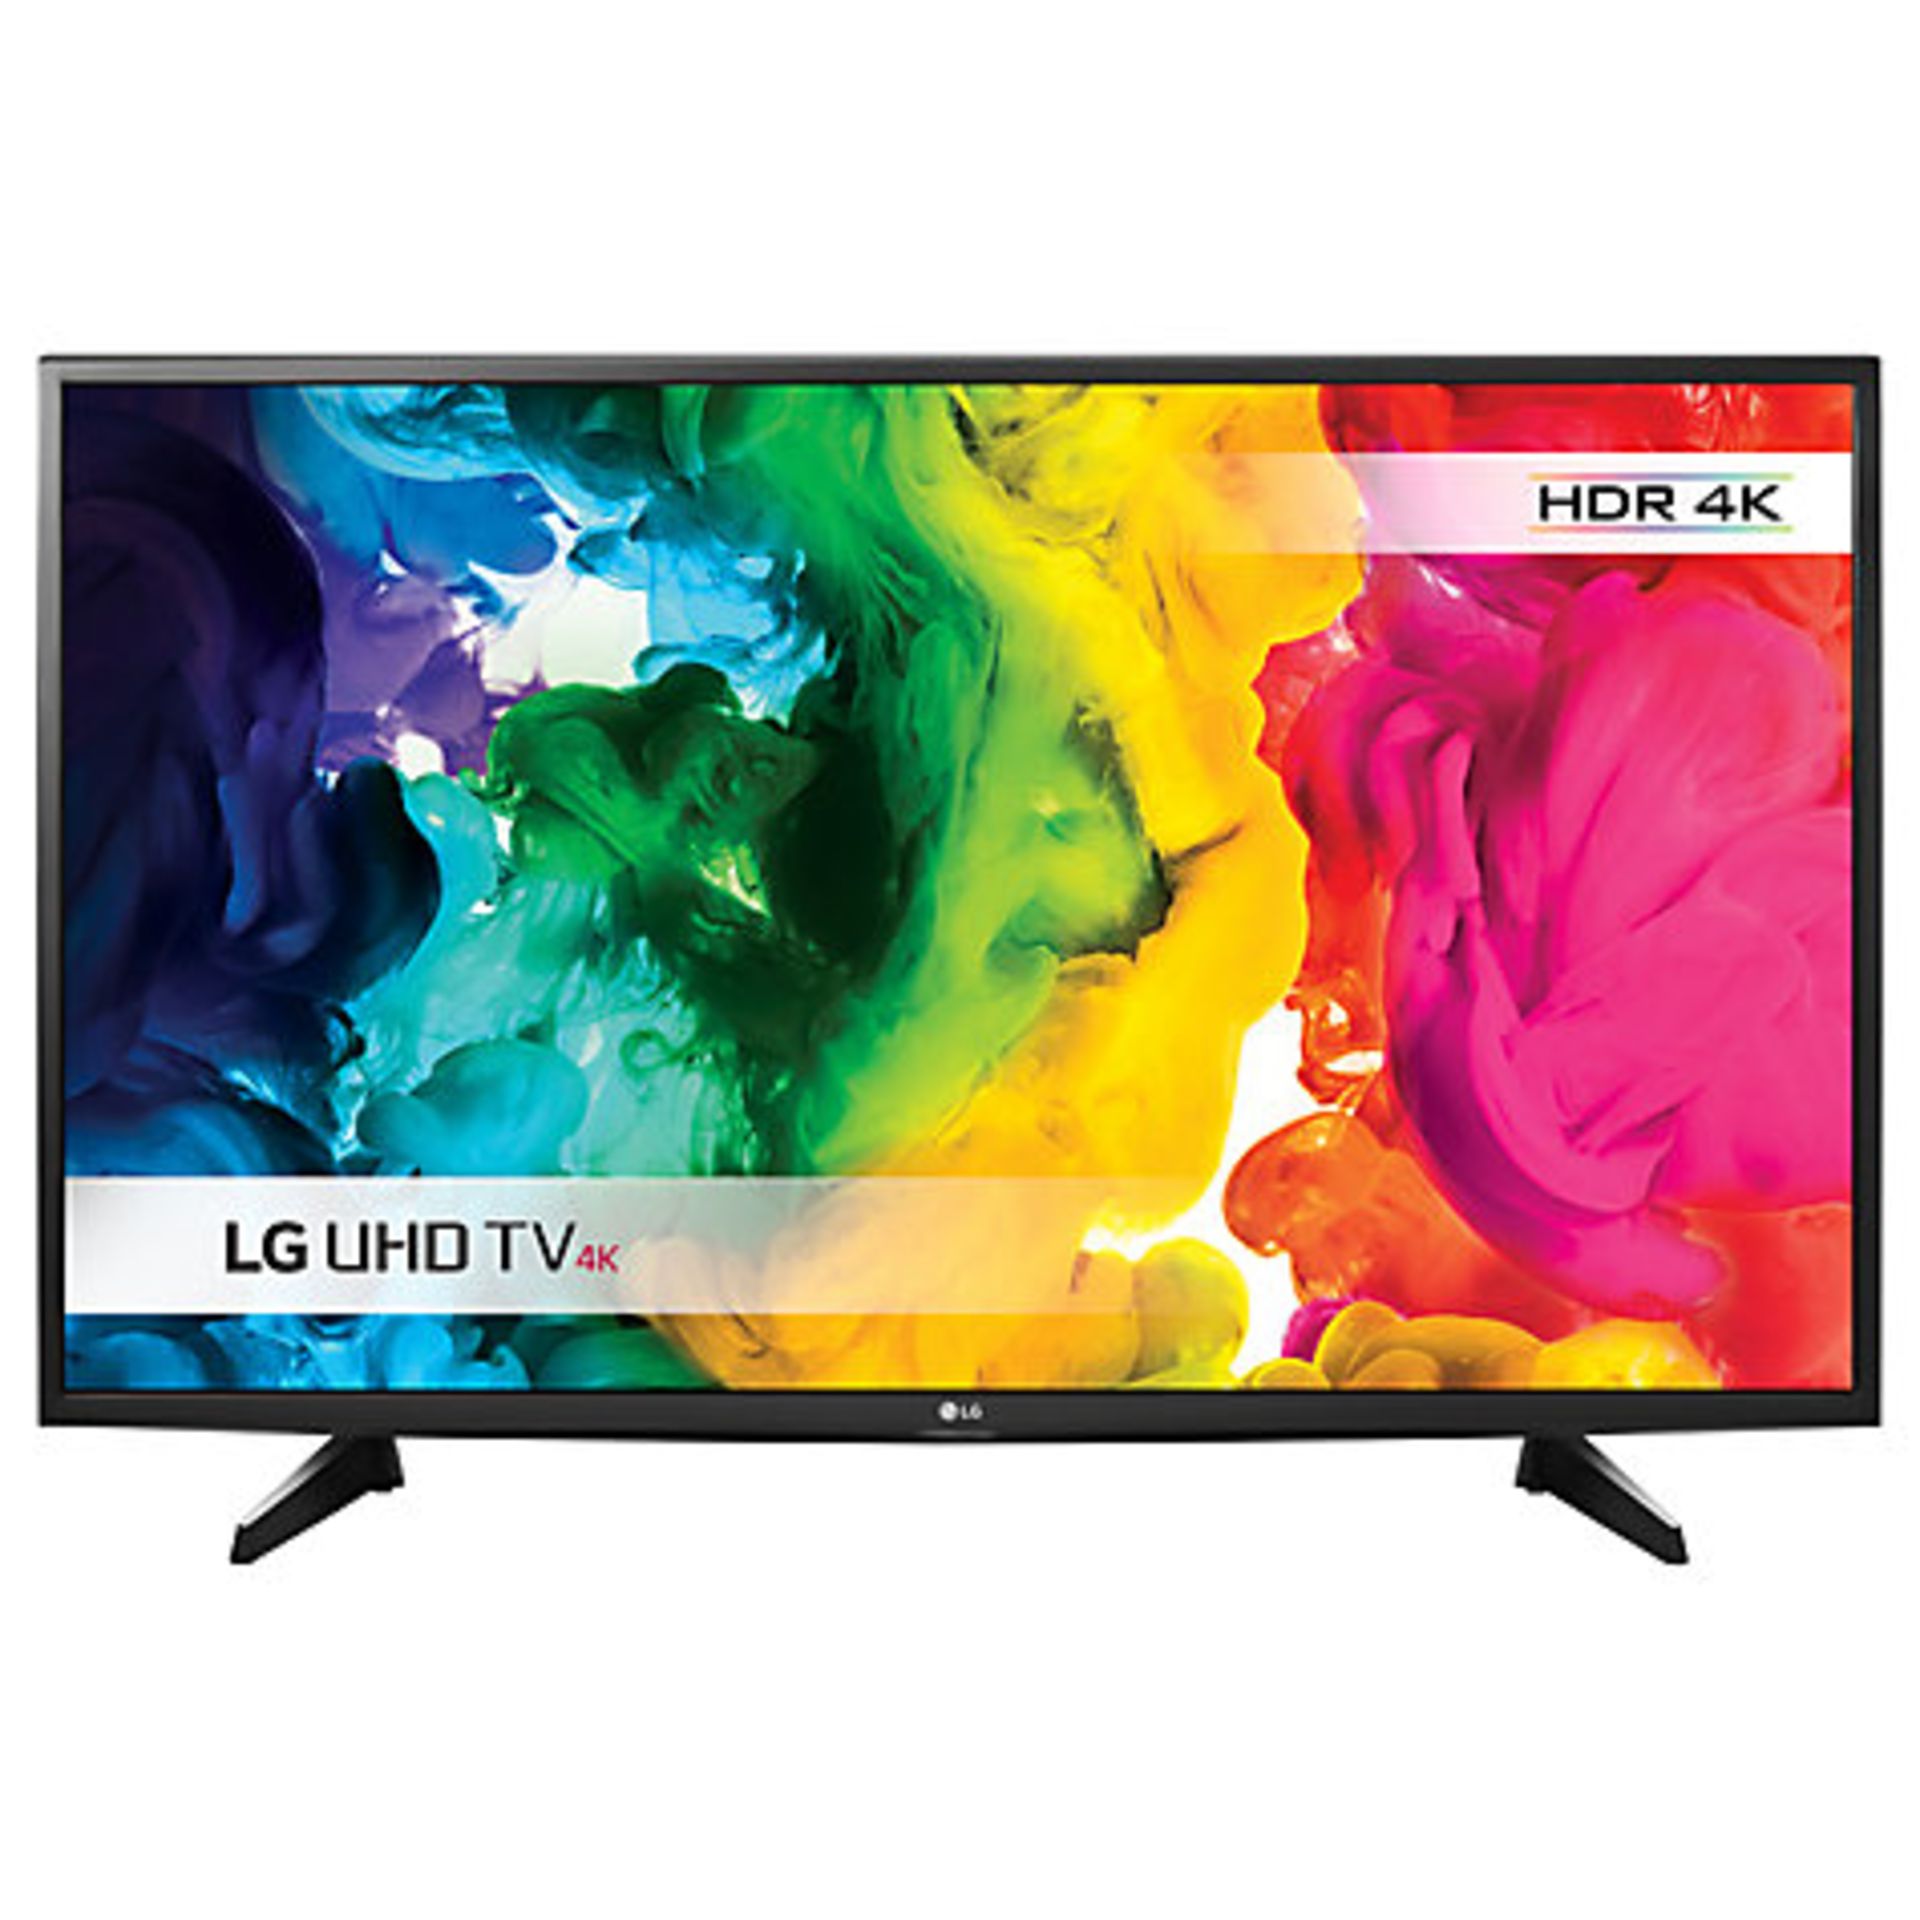 V Grade A 43" LG HDR 4K Ultra HD LED Smart TV With Freeview HD And WEBOS 3.0 & WiFi - Item available